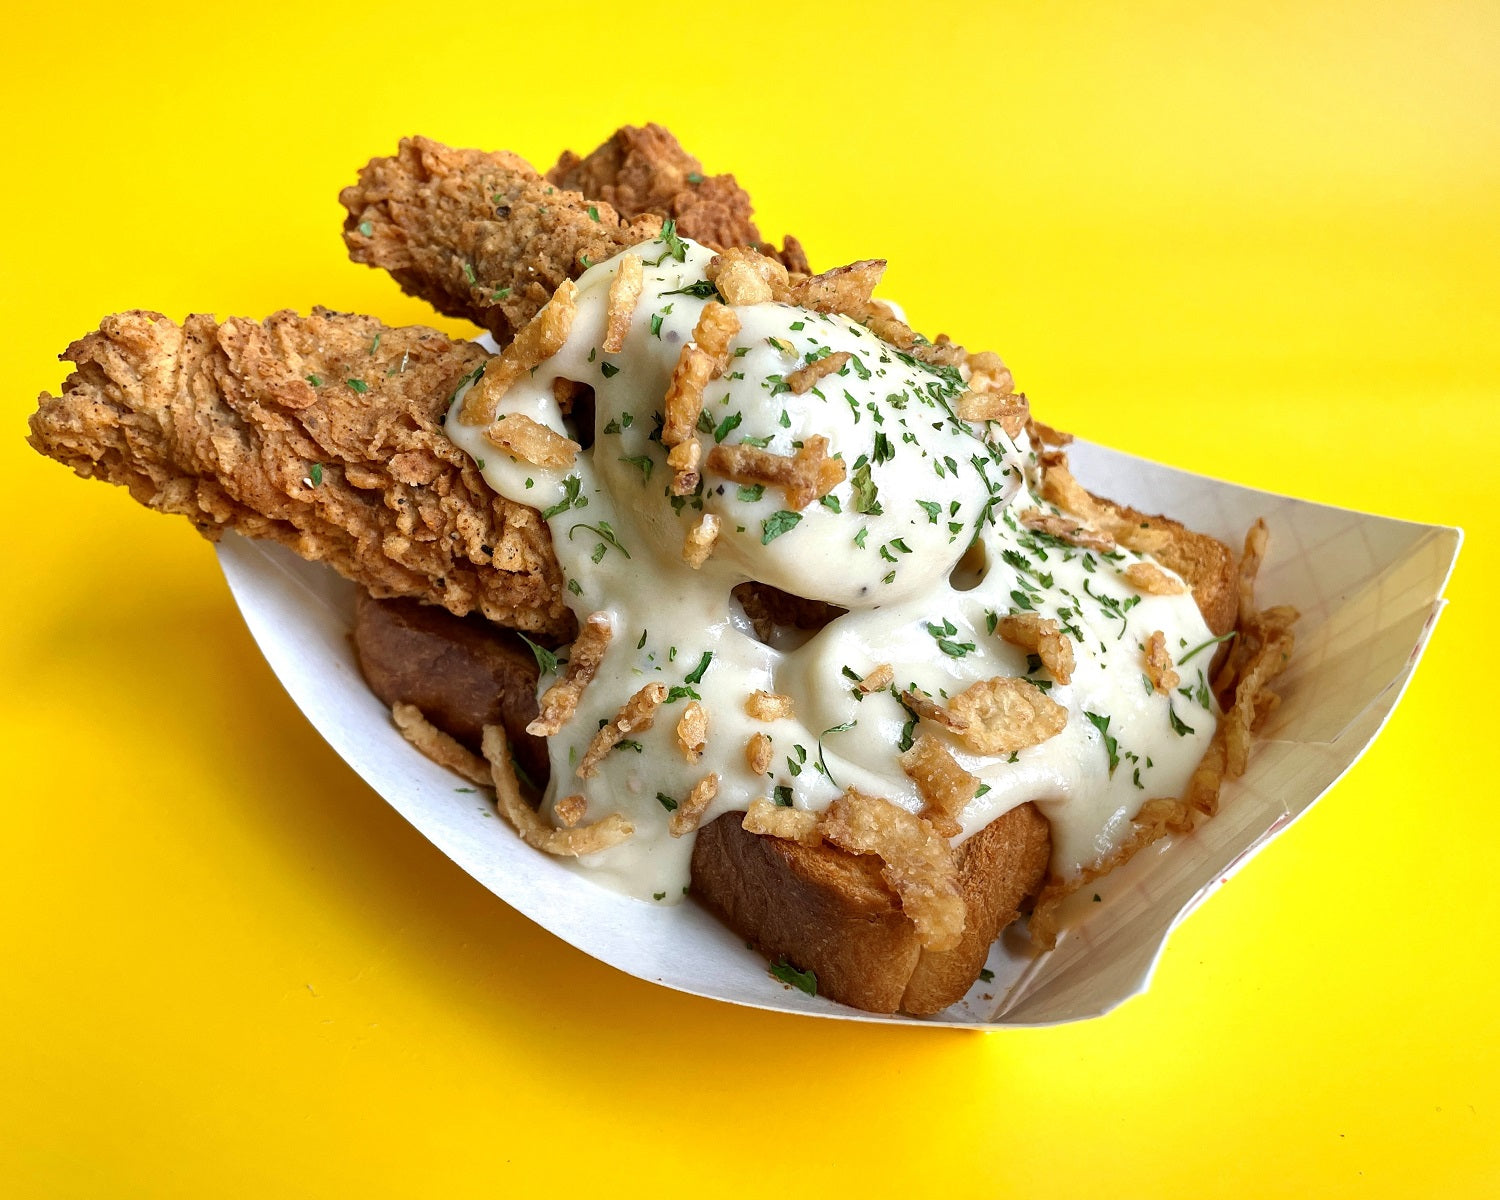 paper boat with texas toast topped with vegan chicken fried steak tenders, sausage gravy, fried onions and parsley flakes for the minnesota state fair